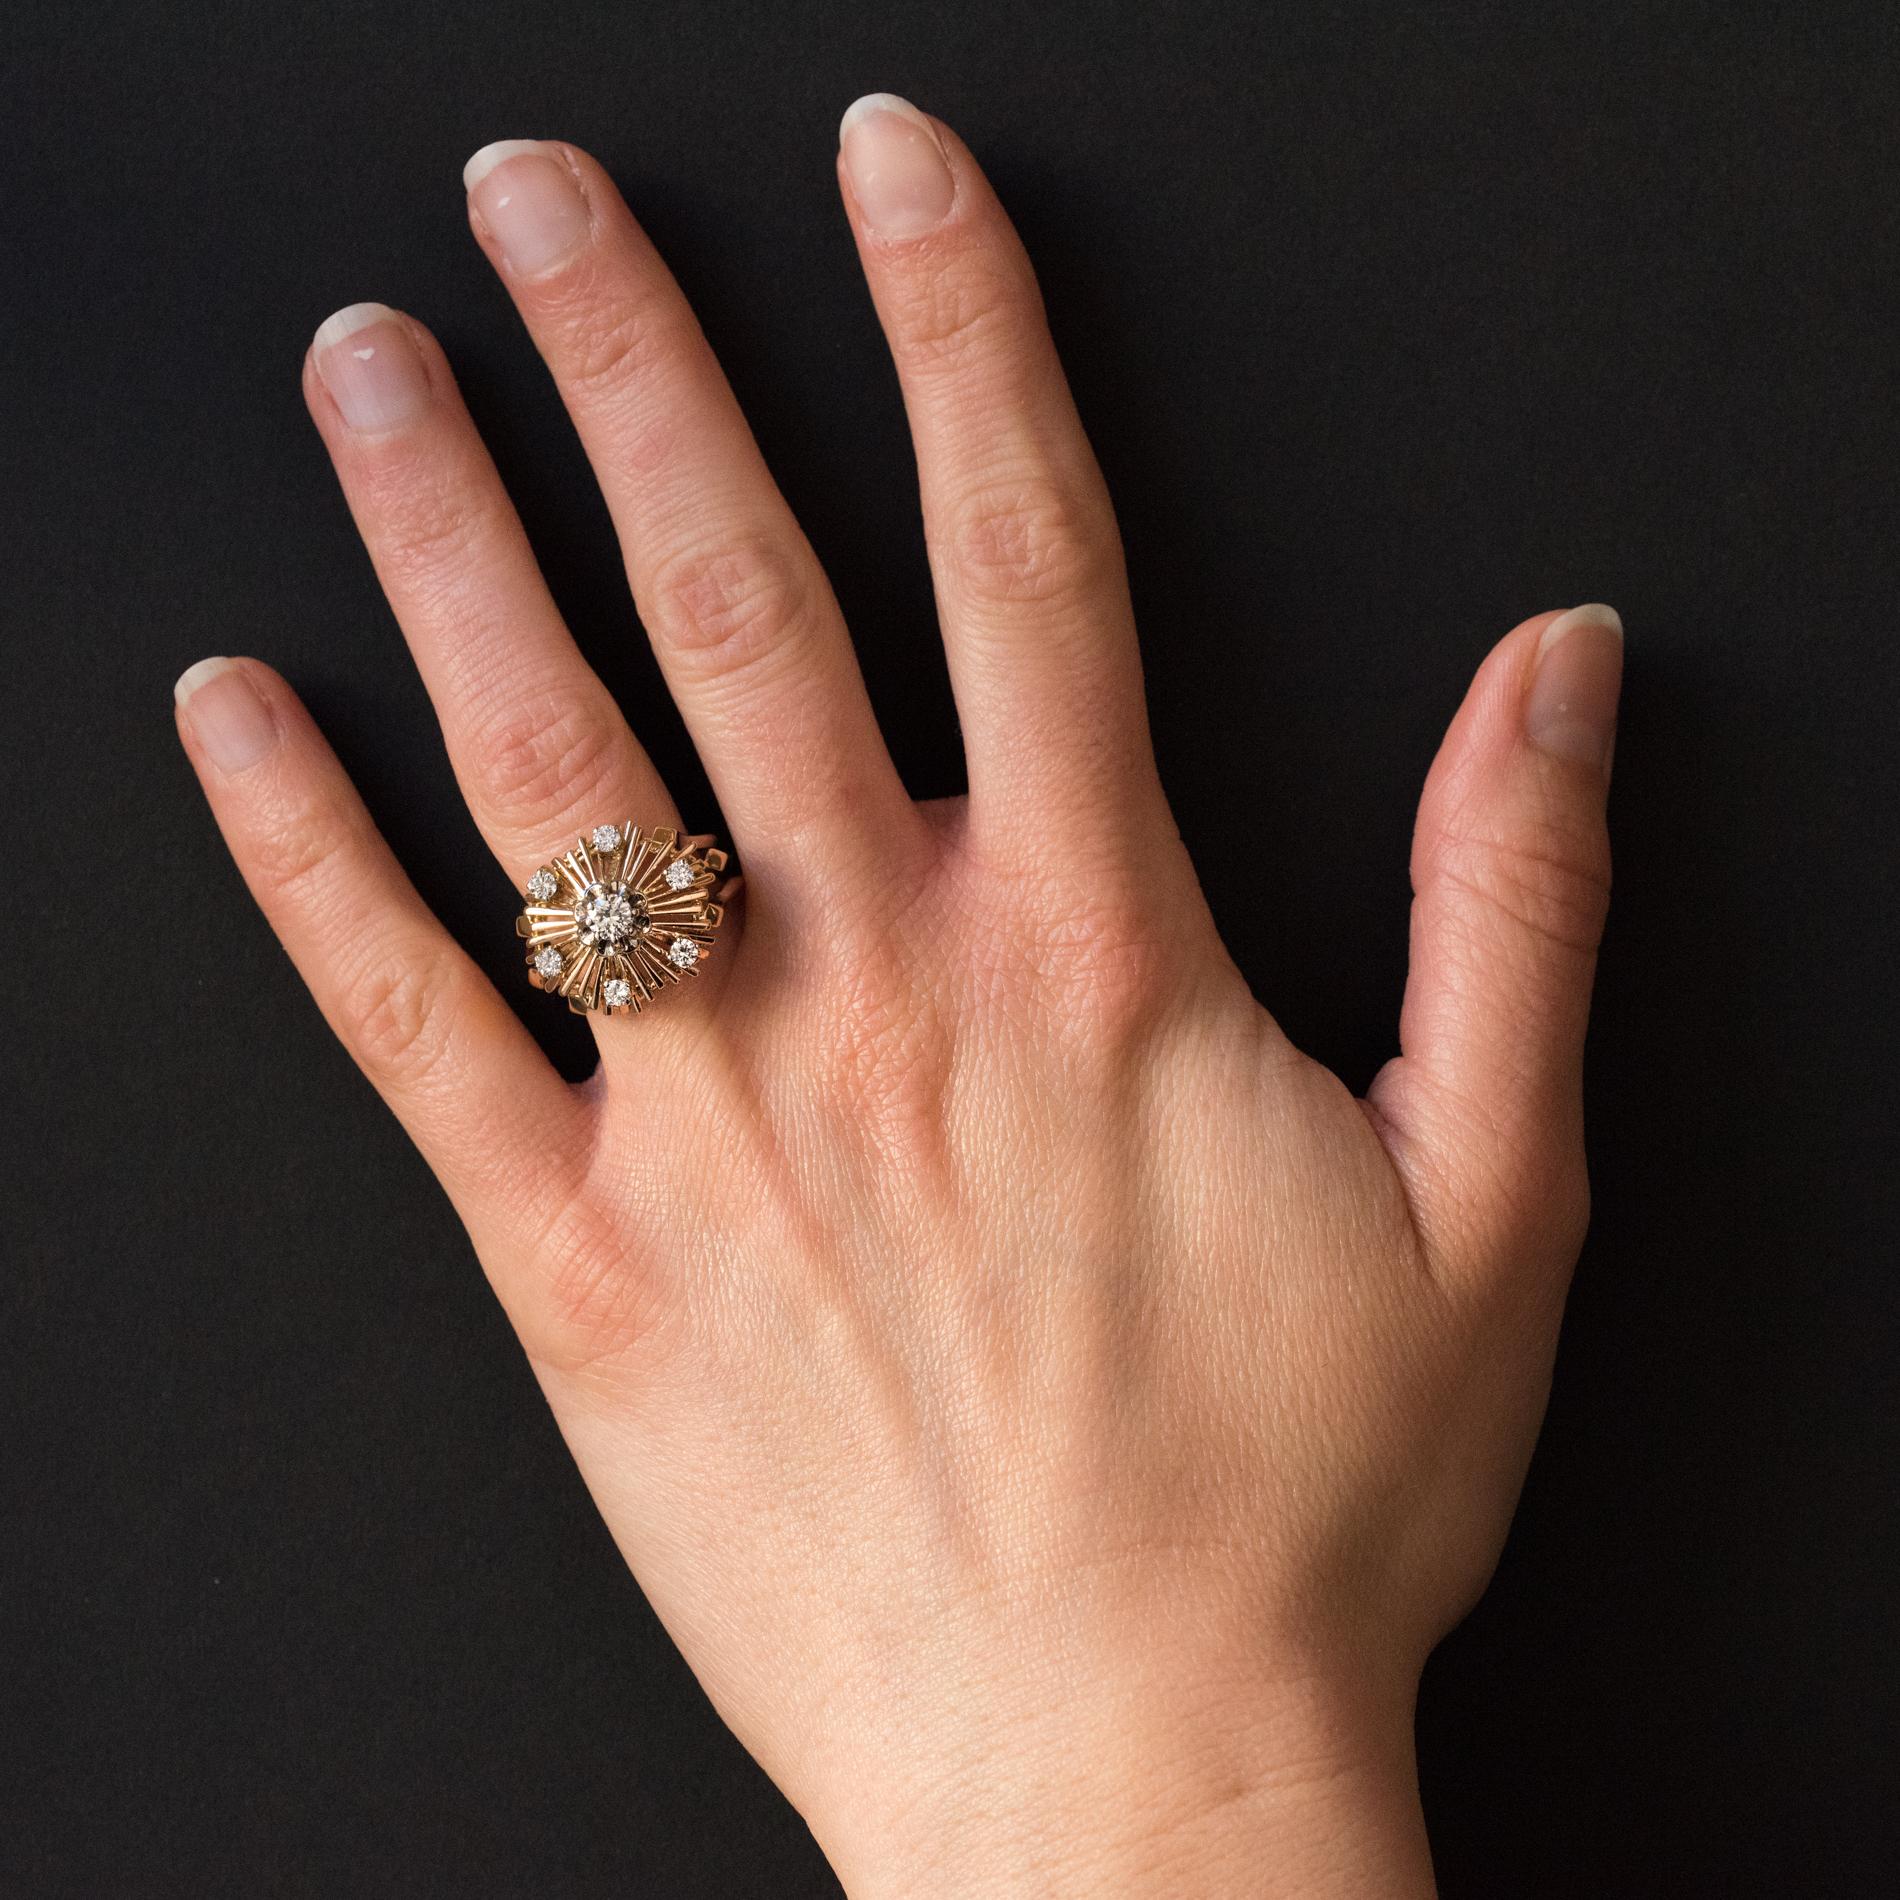 Ring in 18 karat rose gold.
Retro ring, the mounted is made of gold threads arranged to form a radiant decoration and set with a brilliant- cut main diamond surrounded by 6 other diamonds. The beginning of the ring is made up of 3 gold threads which